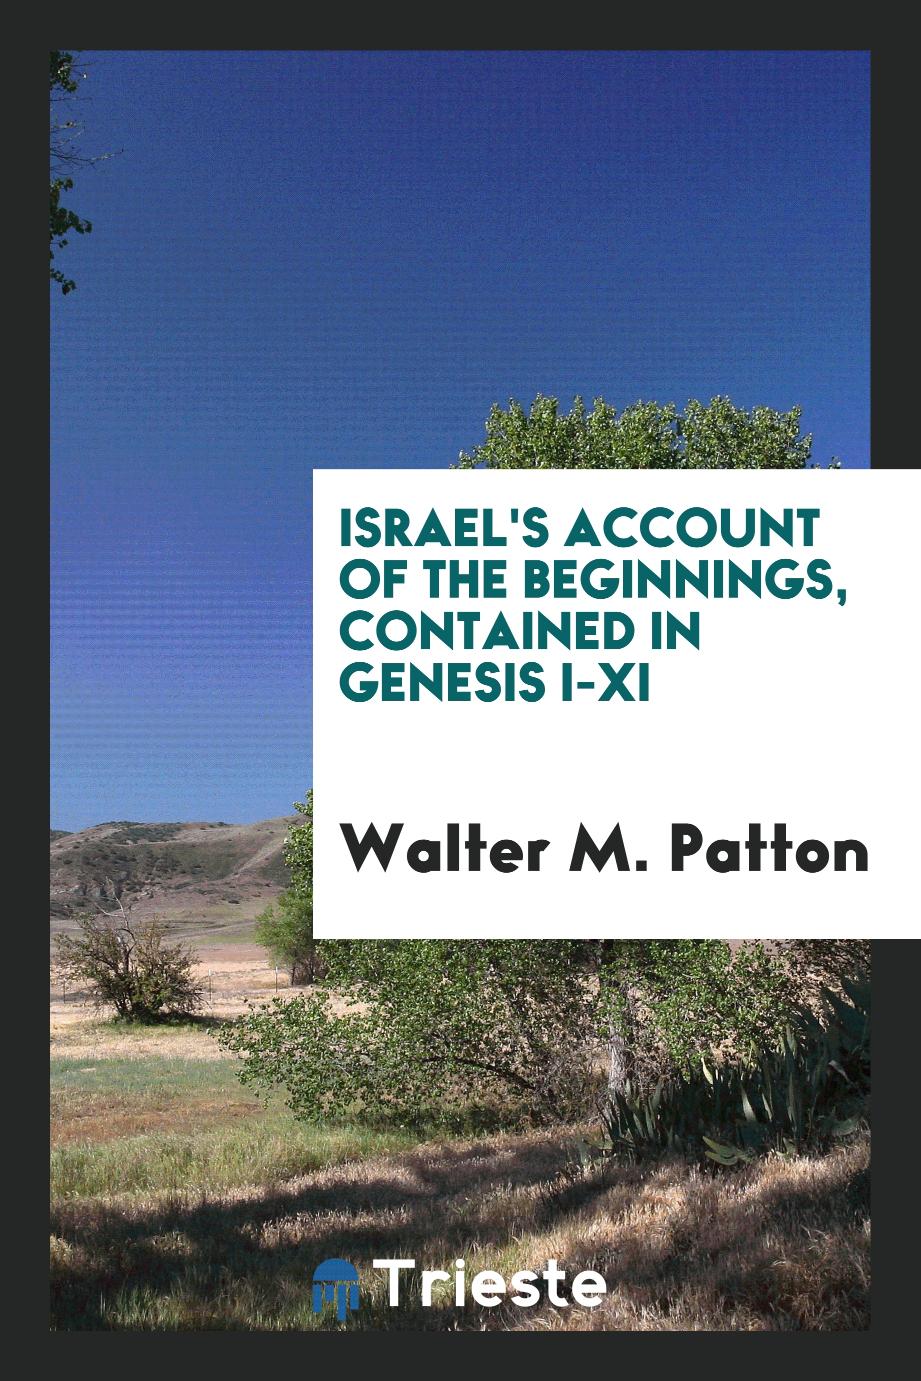 Israel's account of the beginnings, contained in Genesis I-XI